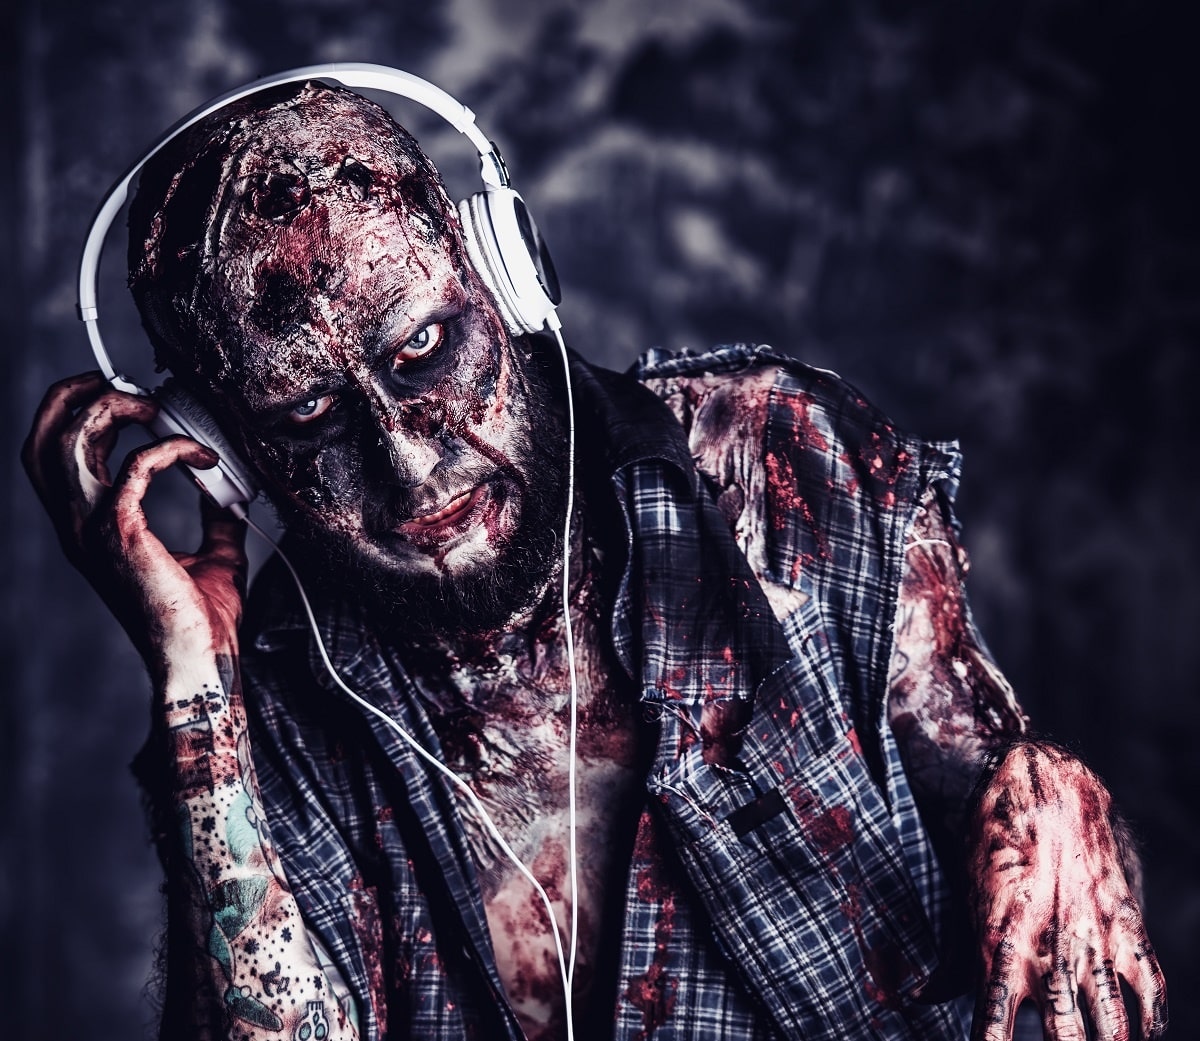 zombie wearing headphones - bring your podcast back from the dead